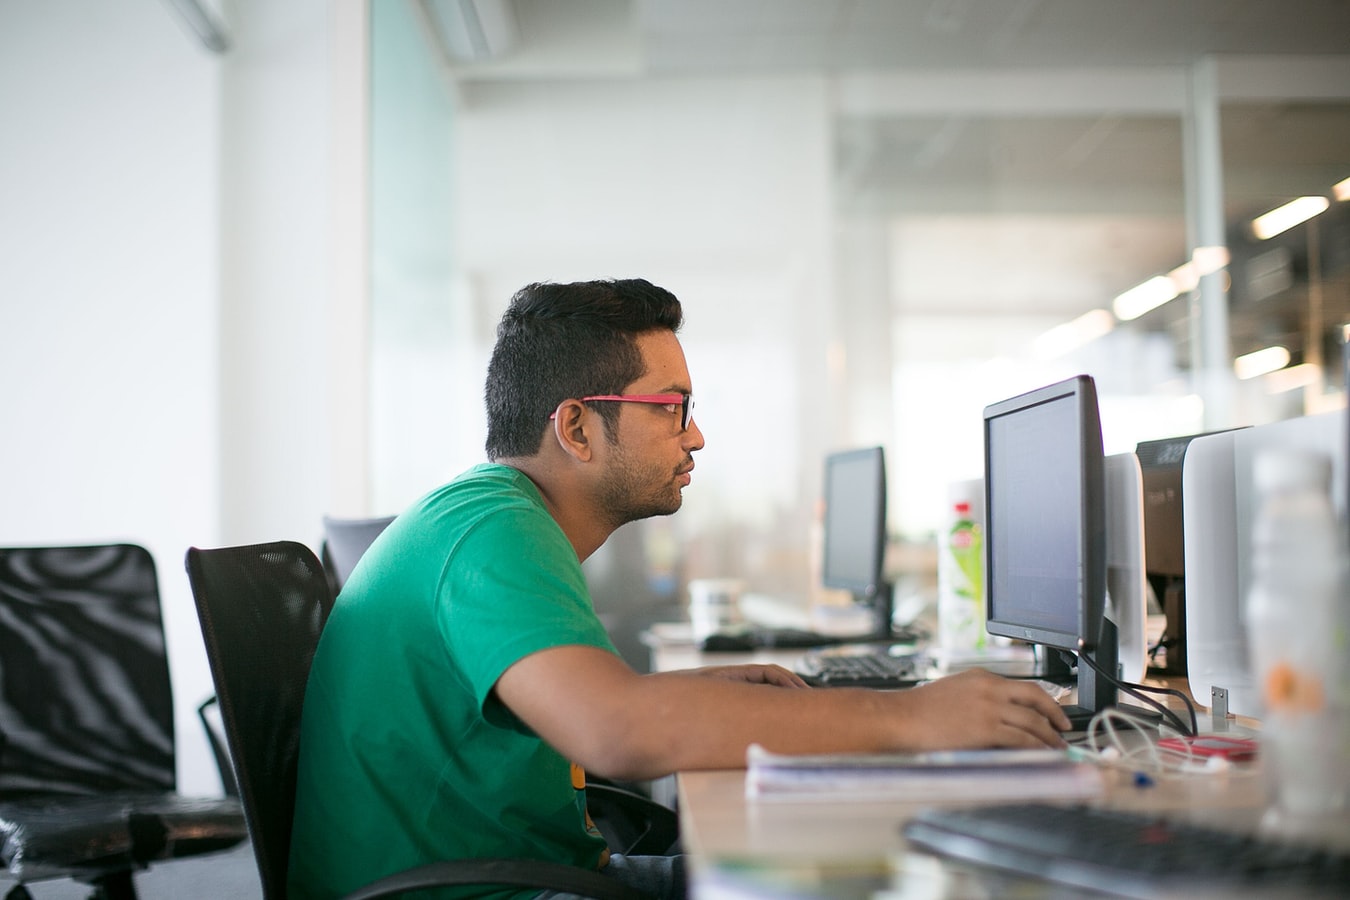 A photo of an office worker in Delhi, India, representing the significant development India's IT sector has seen